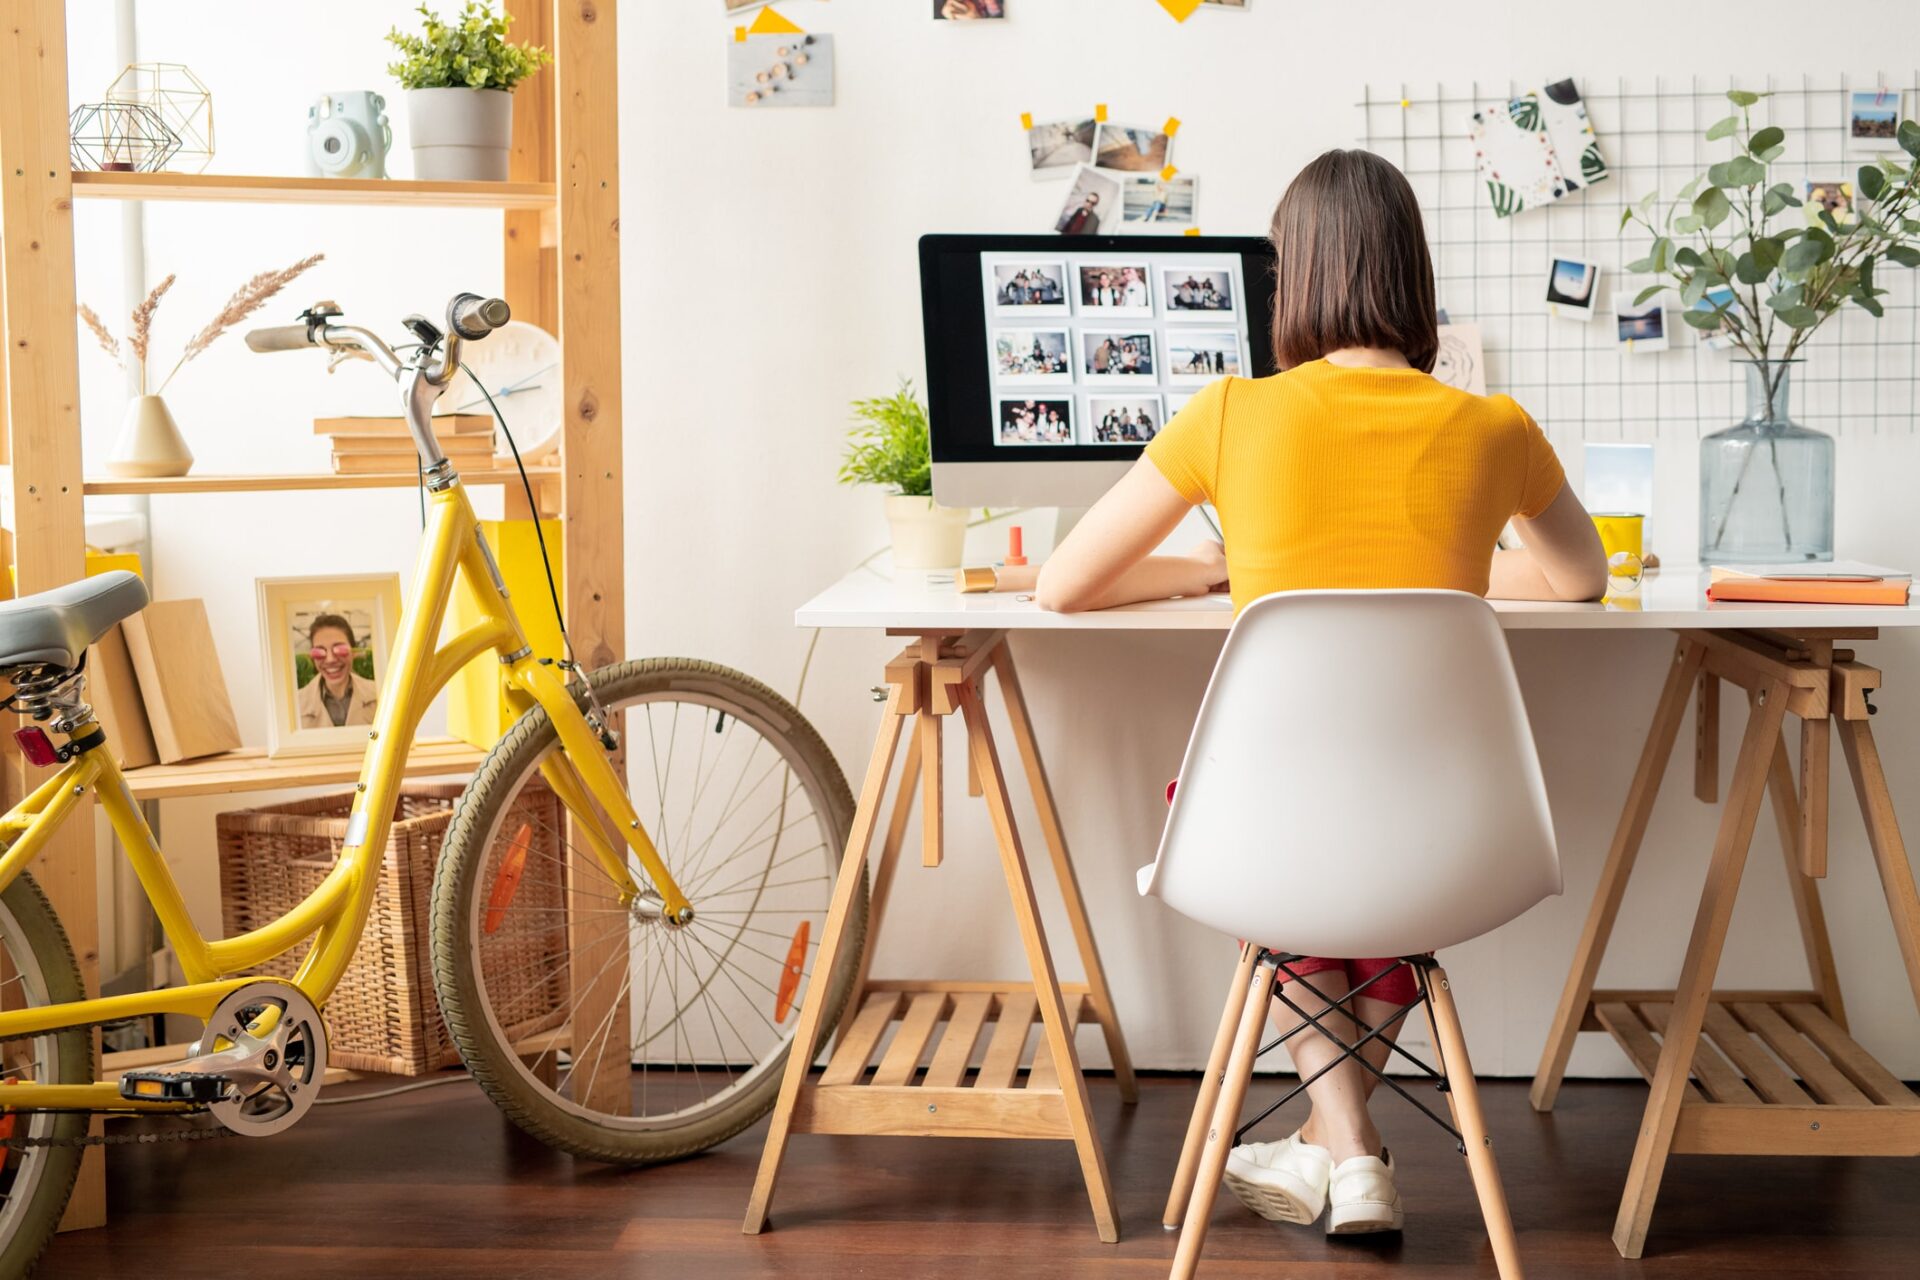 How To Start a Small Business at Home in 9 Steps